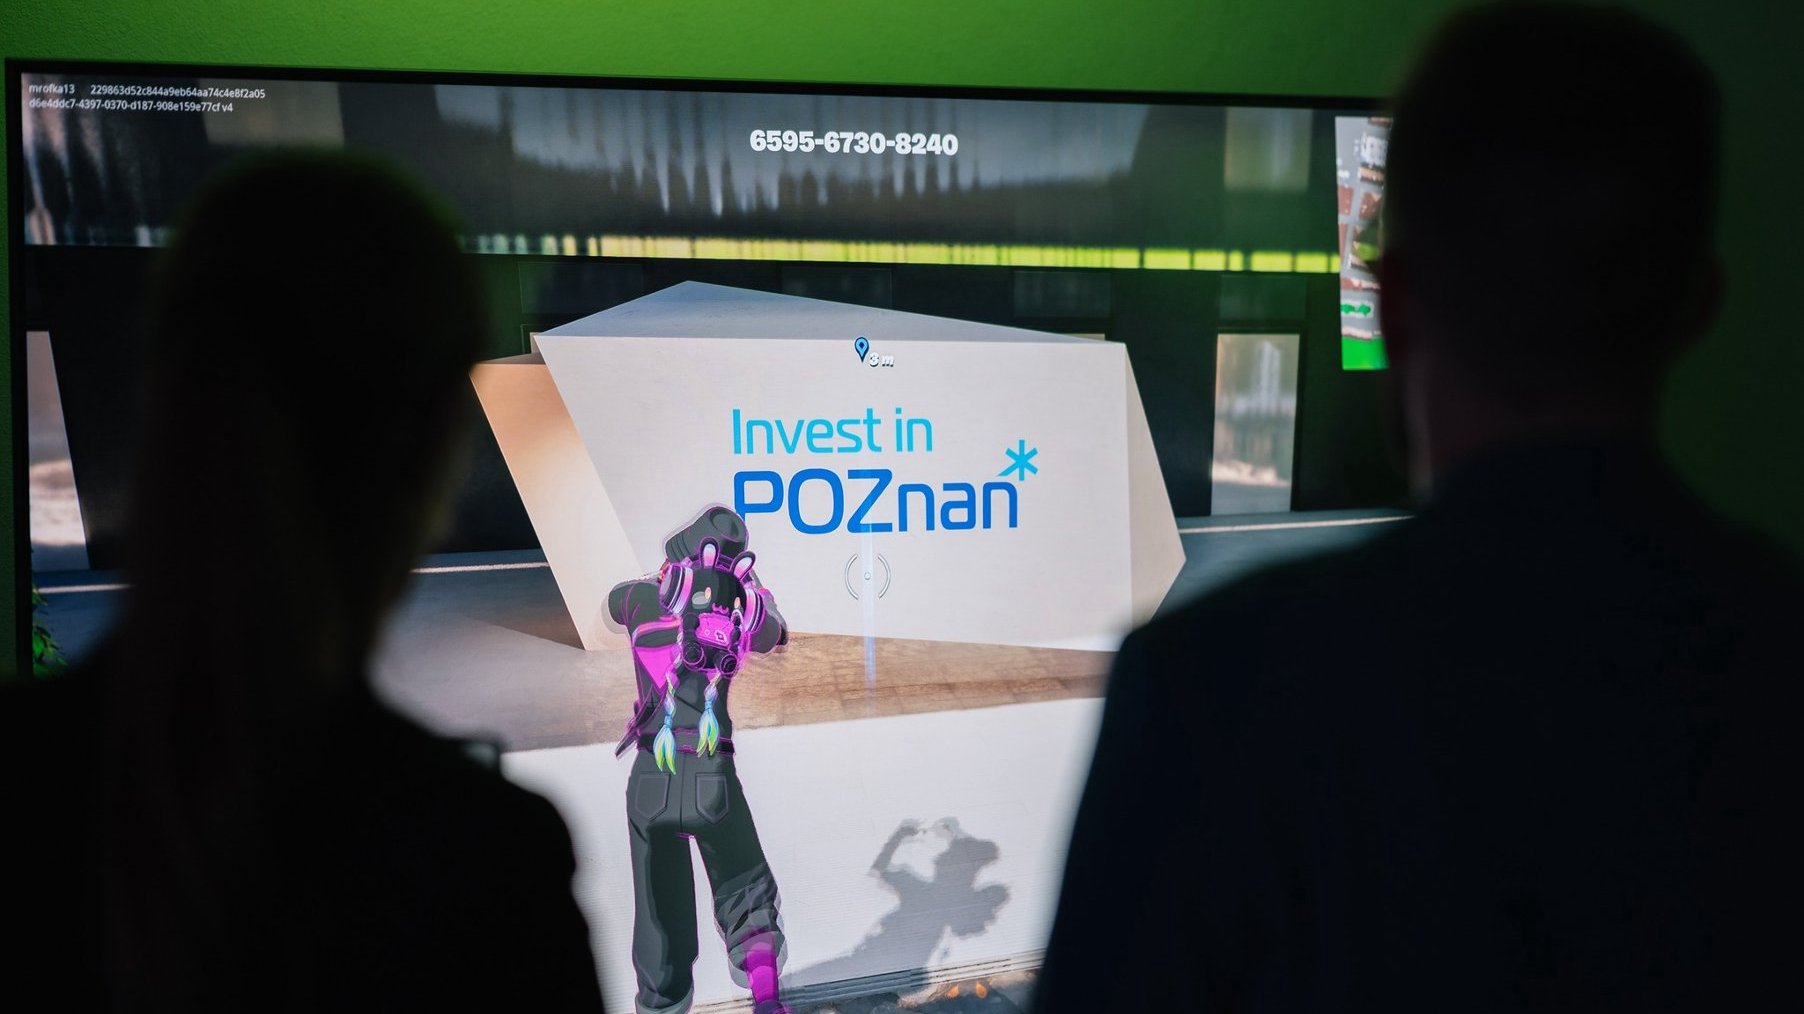 The photo shows two people standing with their backs to the camera. Both are facing the screen on which the game Fortnite is on. The character in the game is looking at a monument with the Invest in Poznań logo.